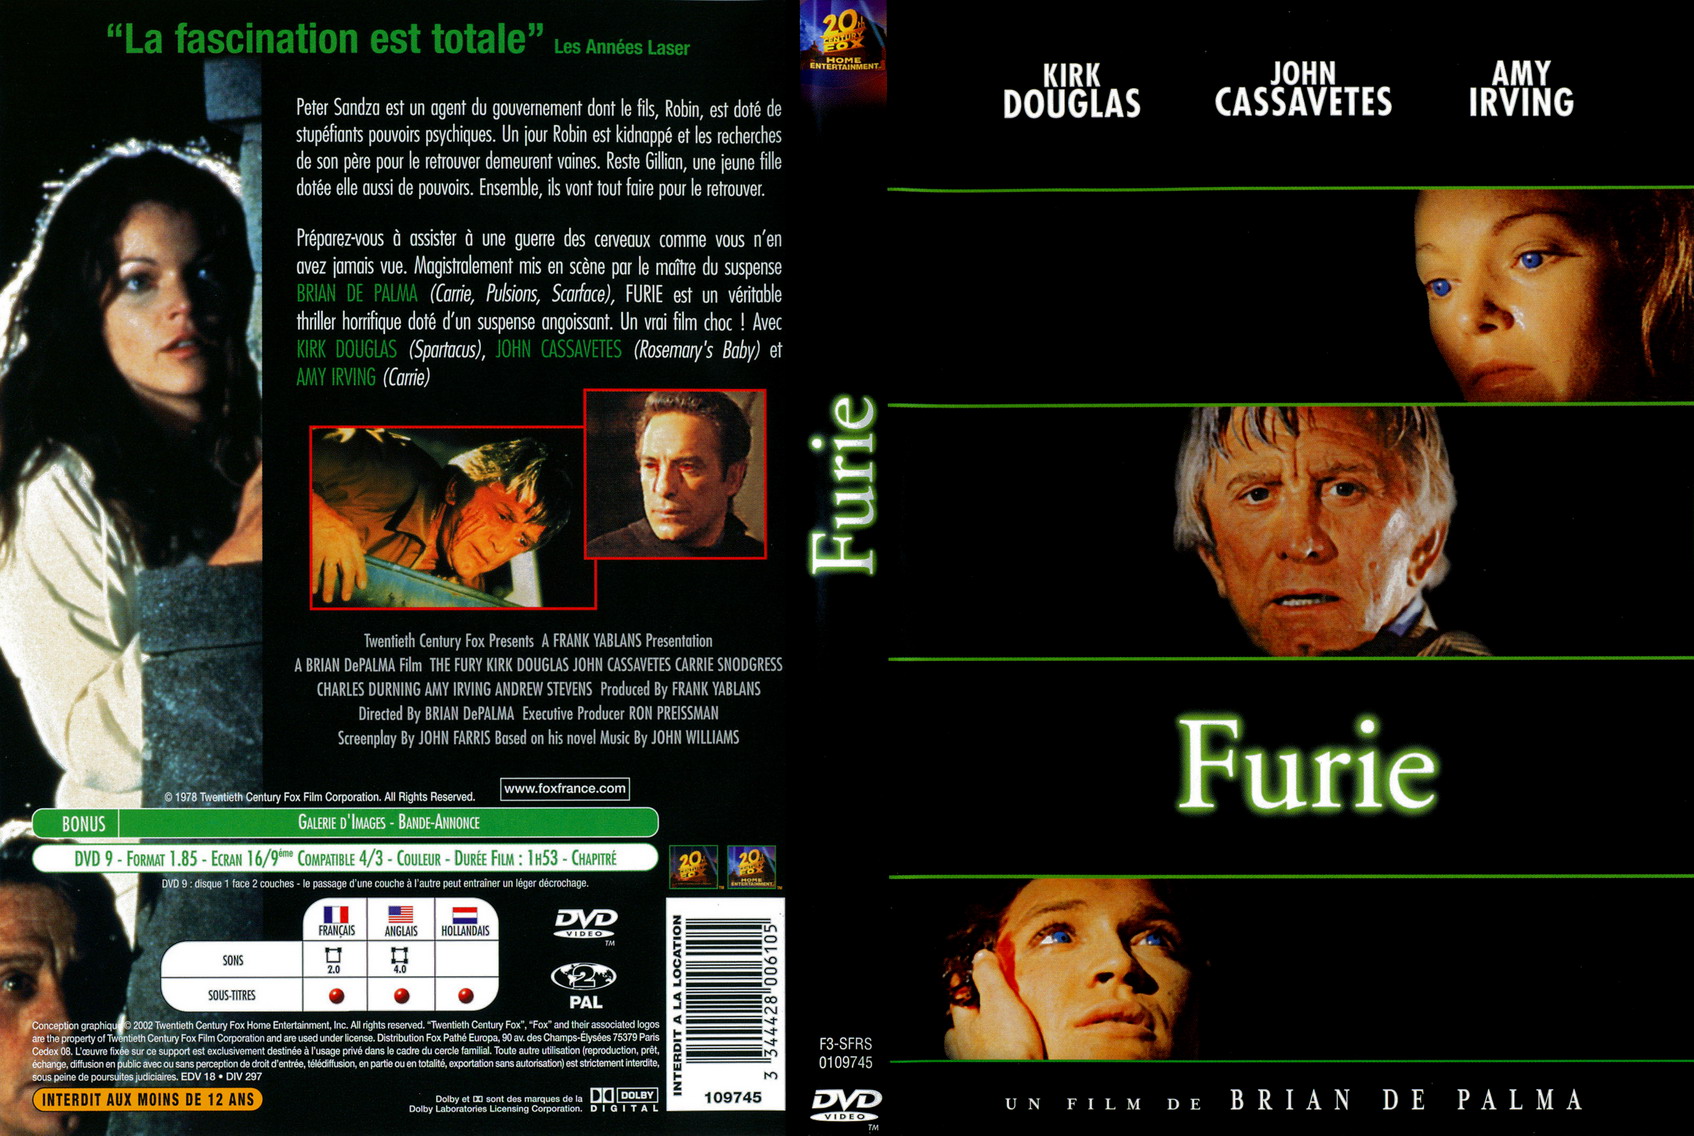 Jaquette DVD Furie